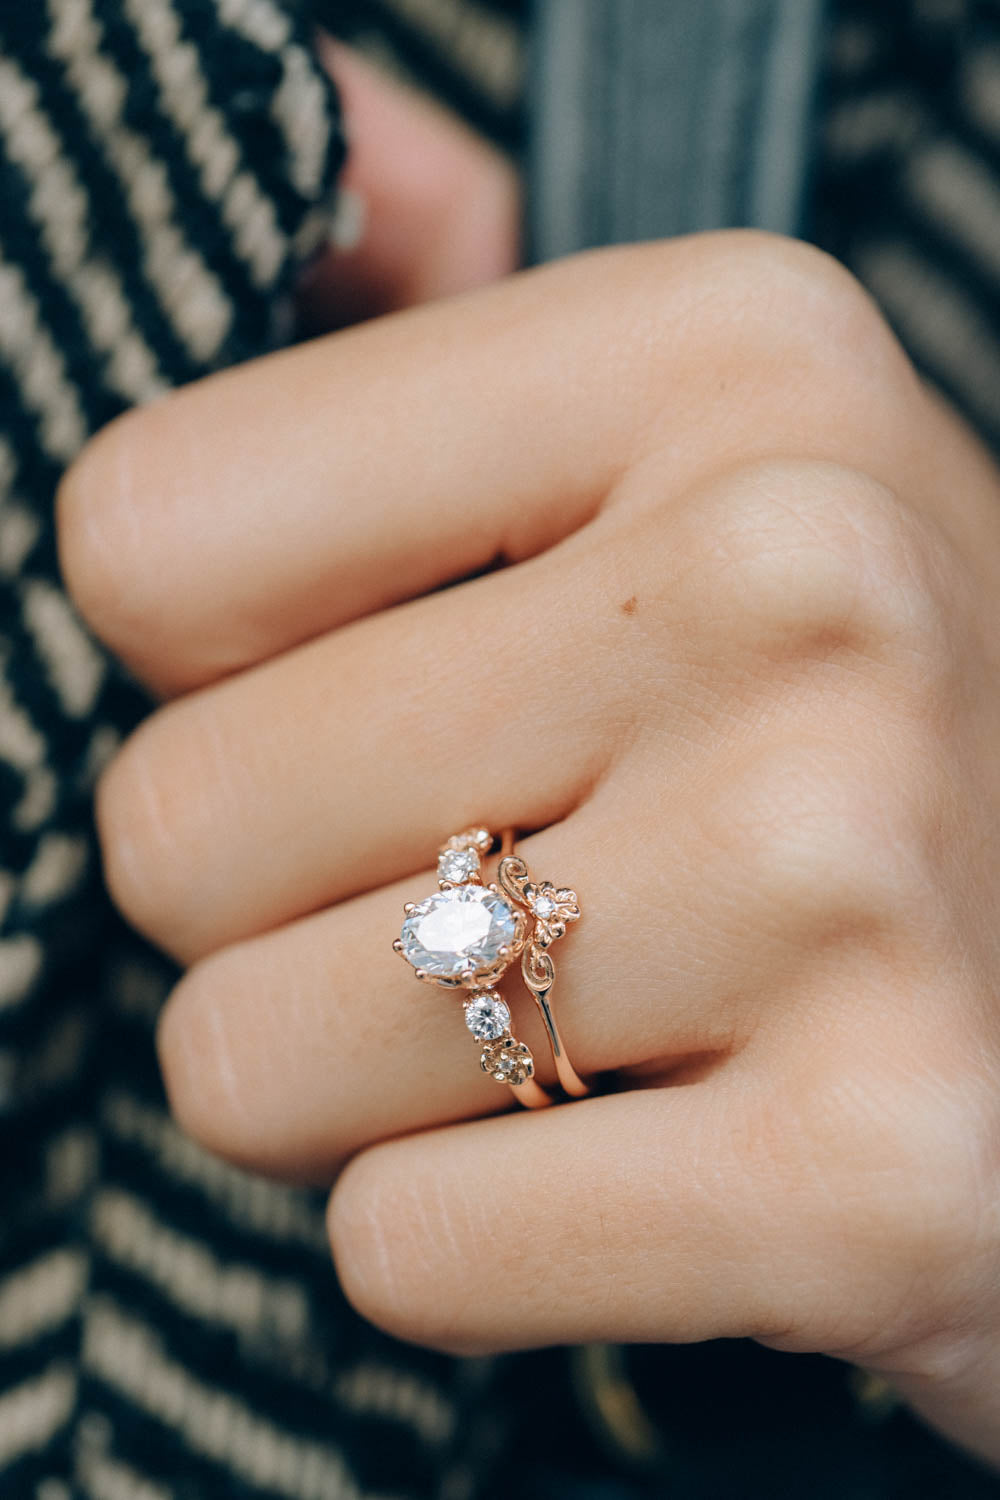 Two-Tone Engagement Rings, Conflict-Free Jewelry